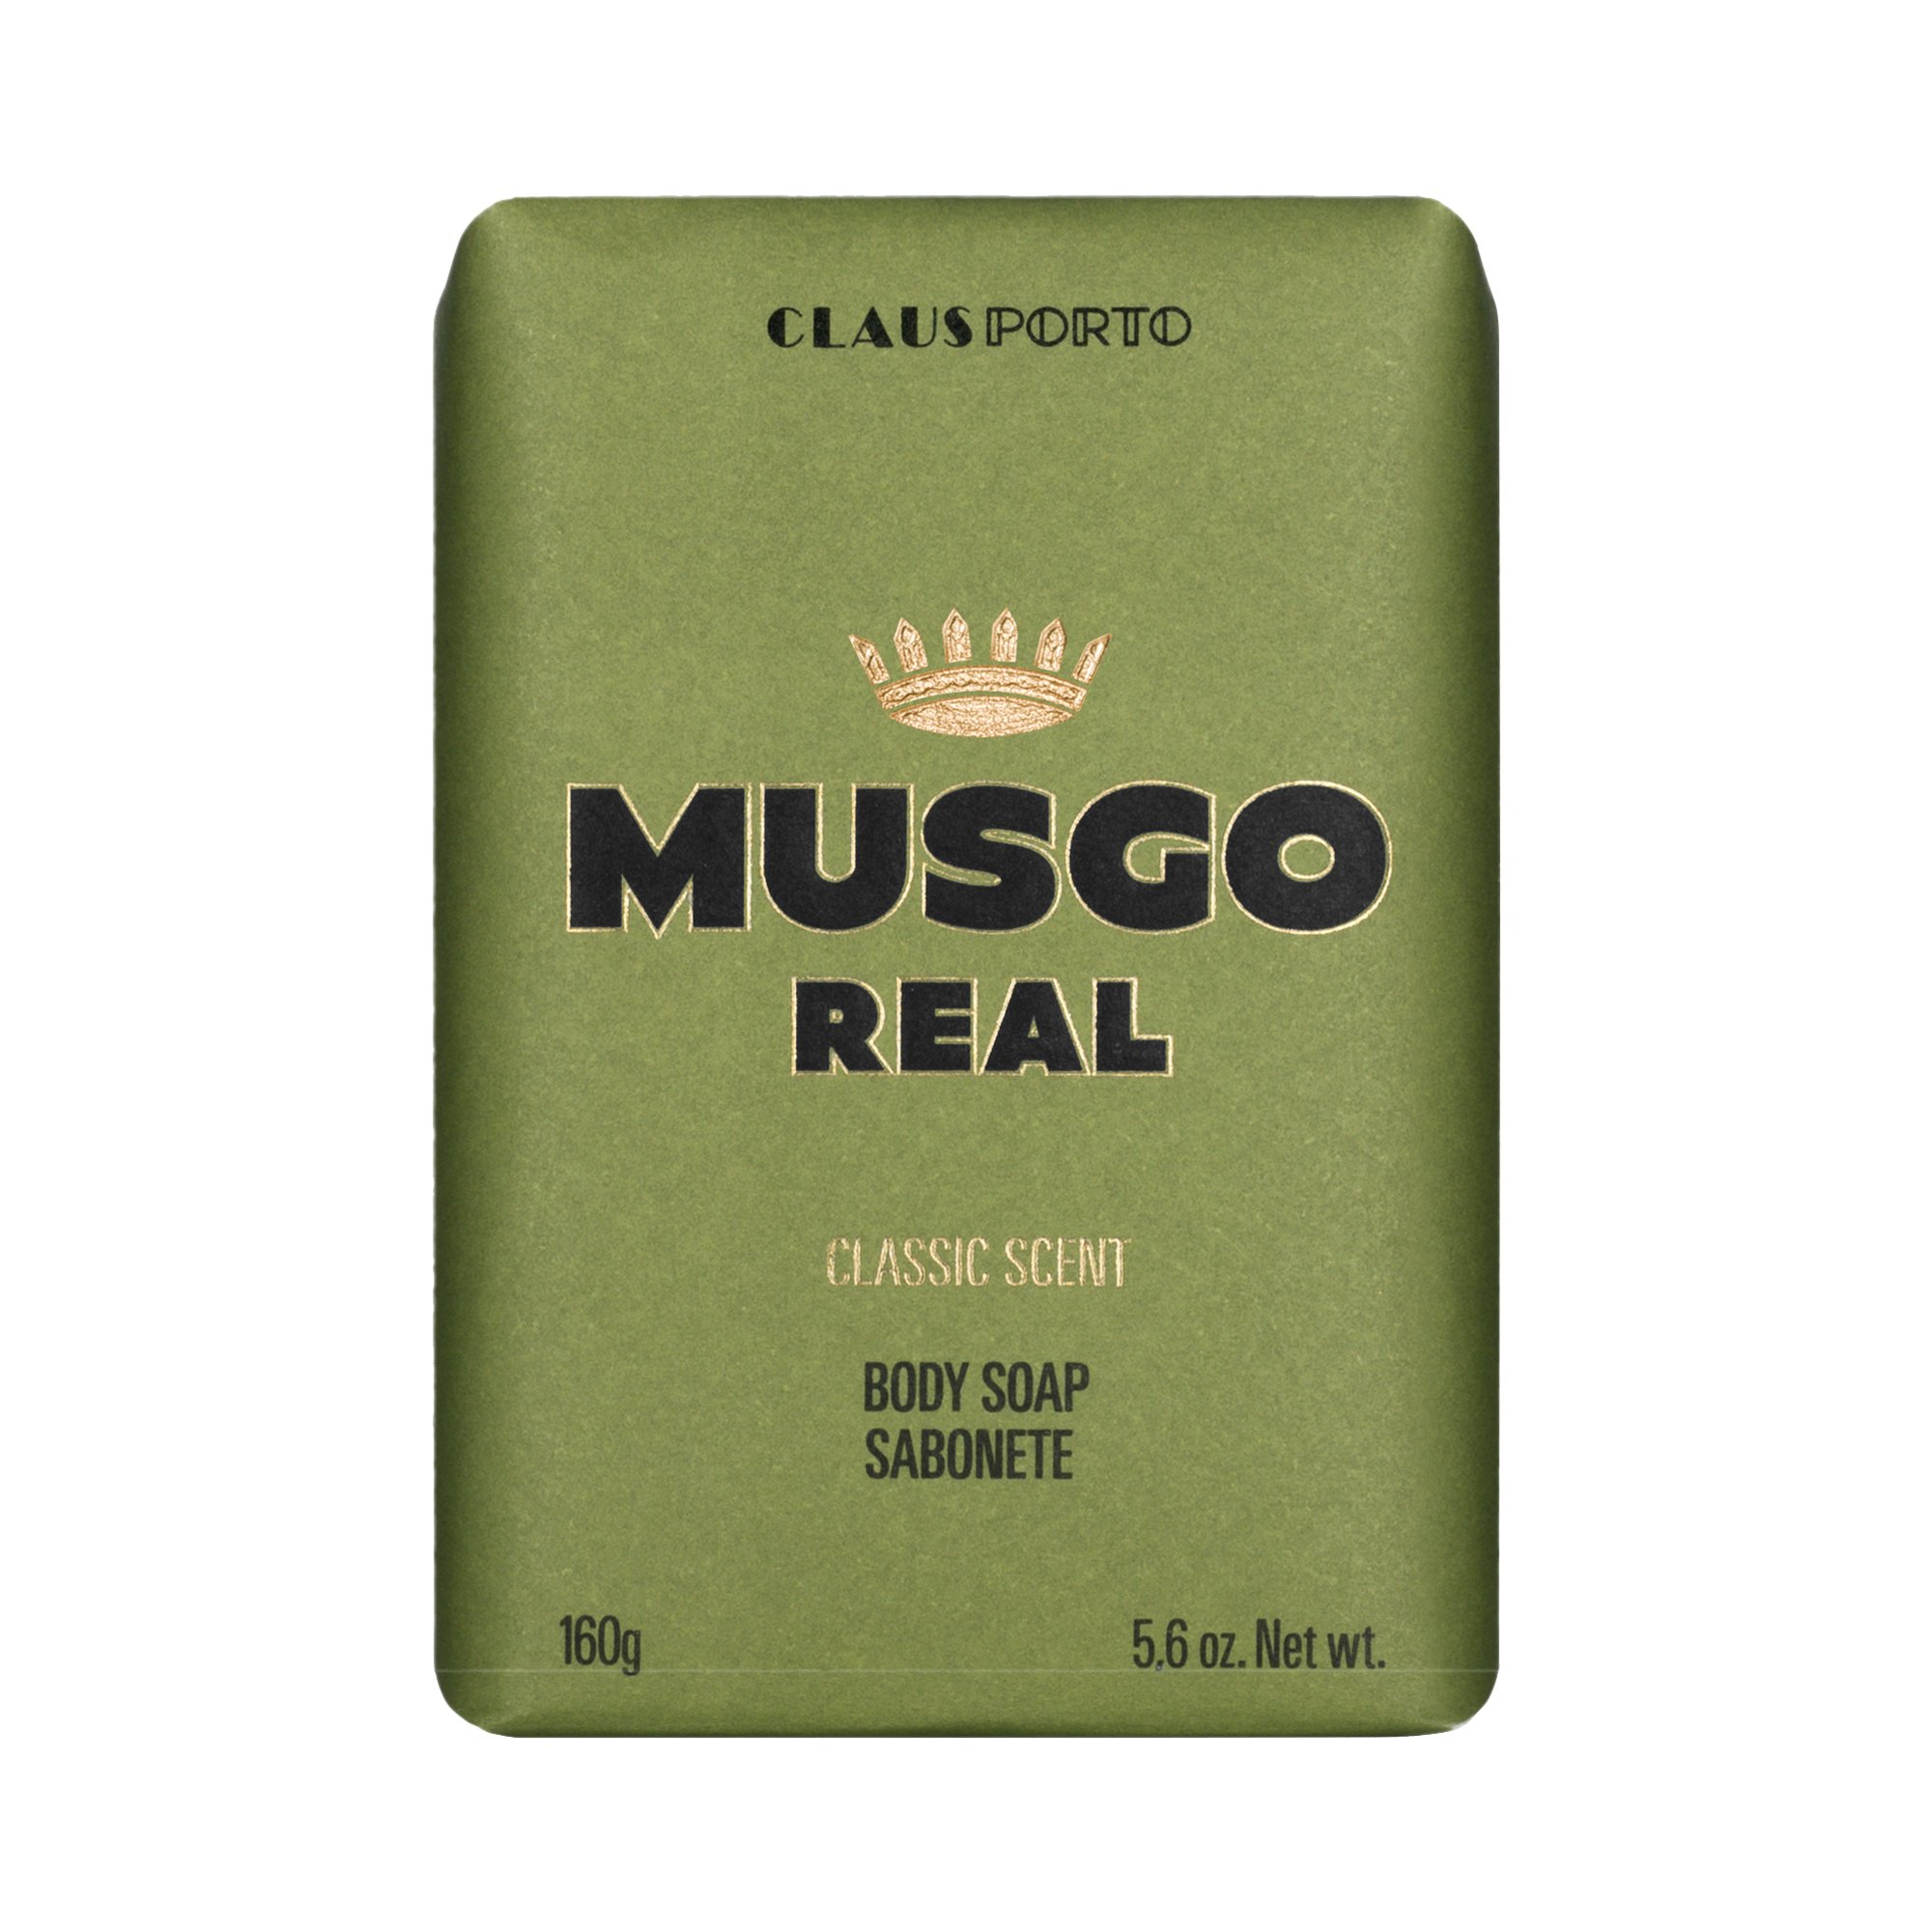 Musgo Real - Men's Body Soap - Körperseife - Classic Scent